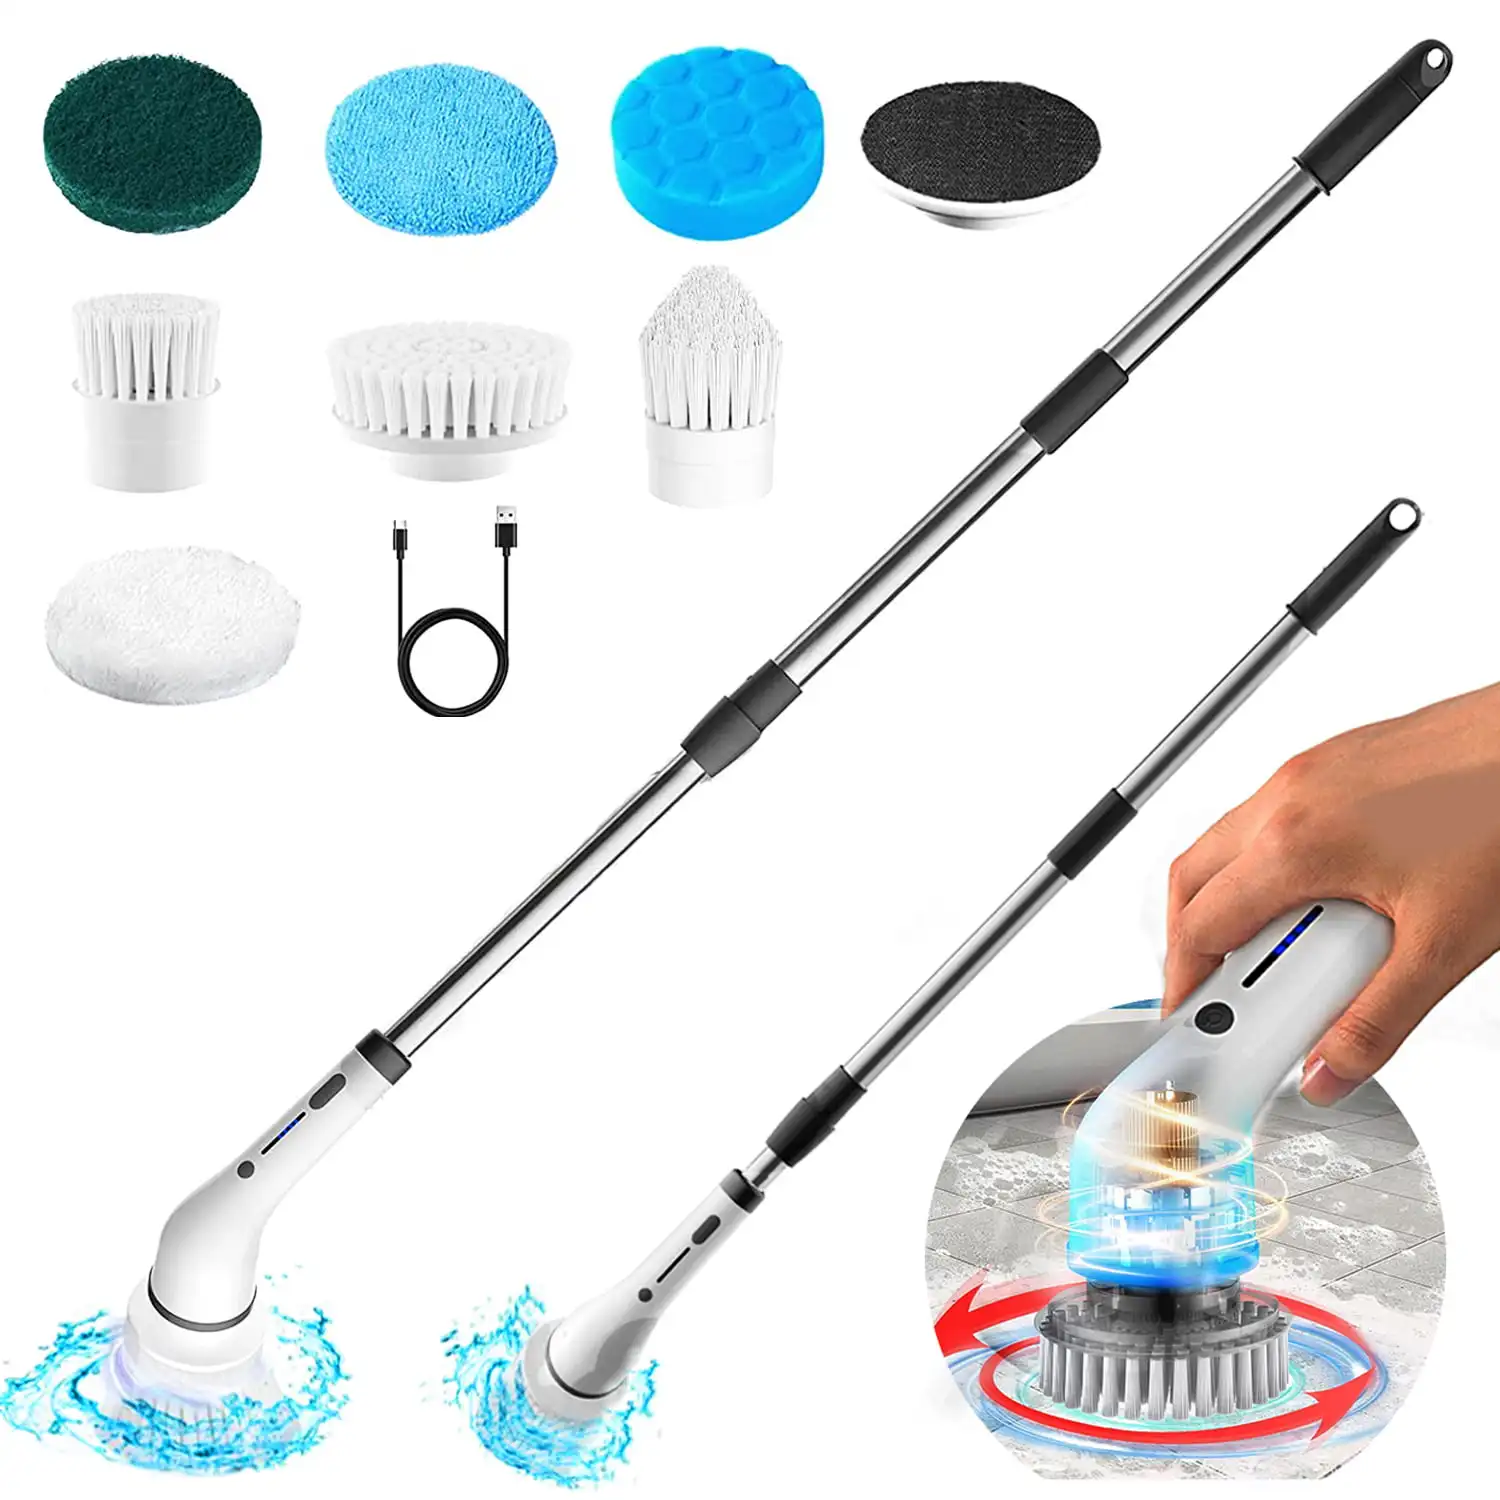 

Electric Spin Scrubber, Cordless Cleaning Brush with 8 Replaceable Brush Heads Adjustable Extension Handle, Power Shower Scrubb